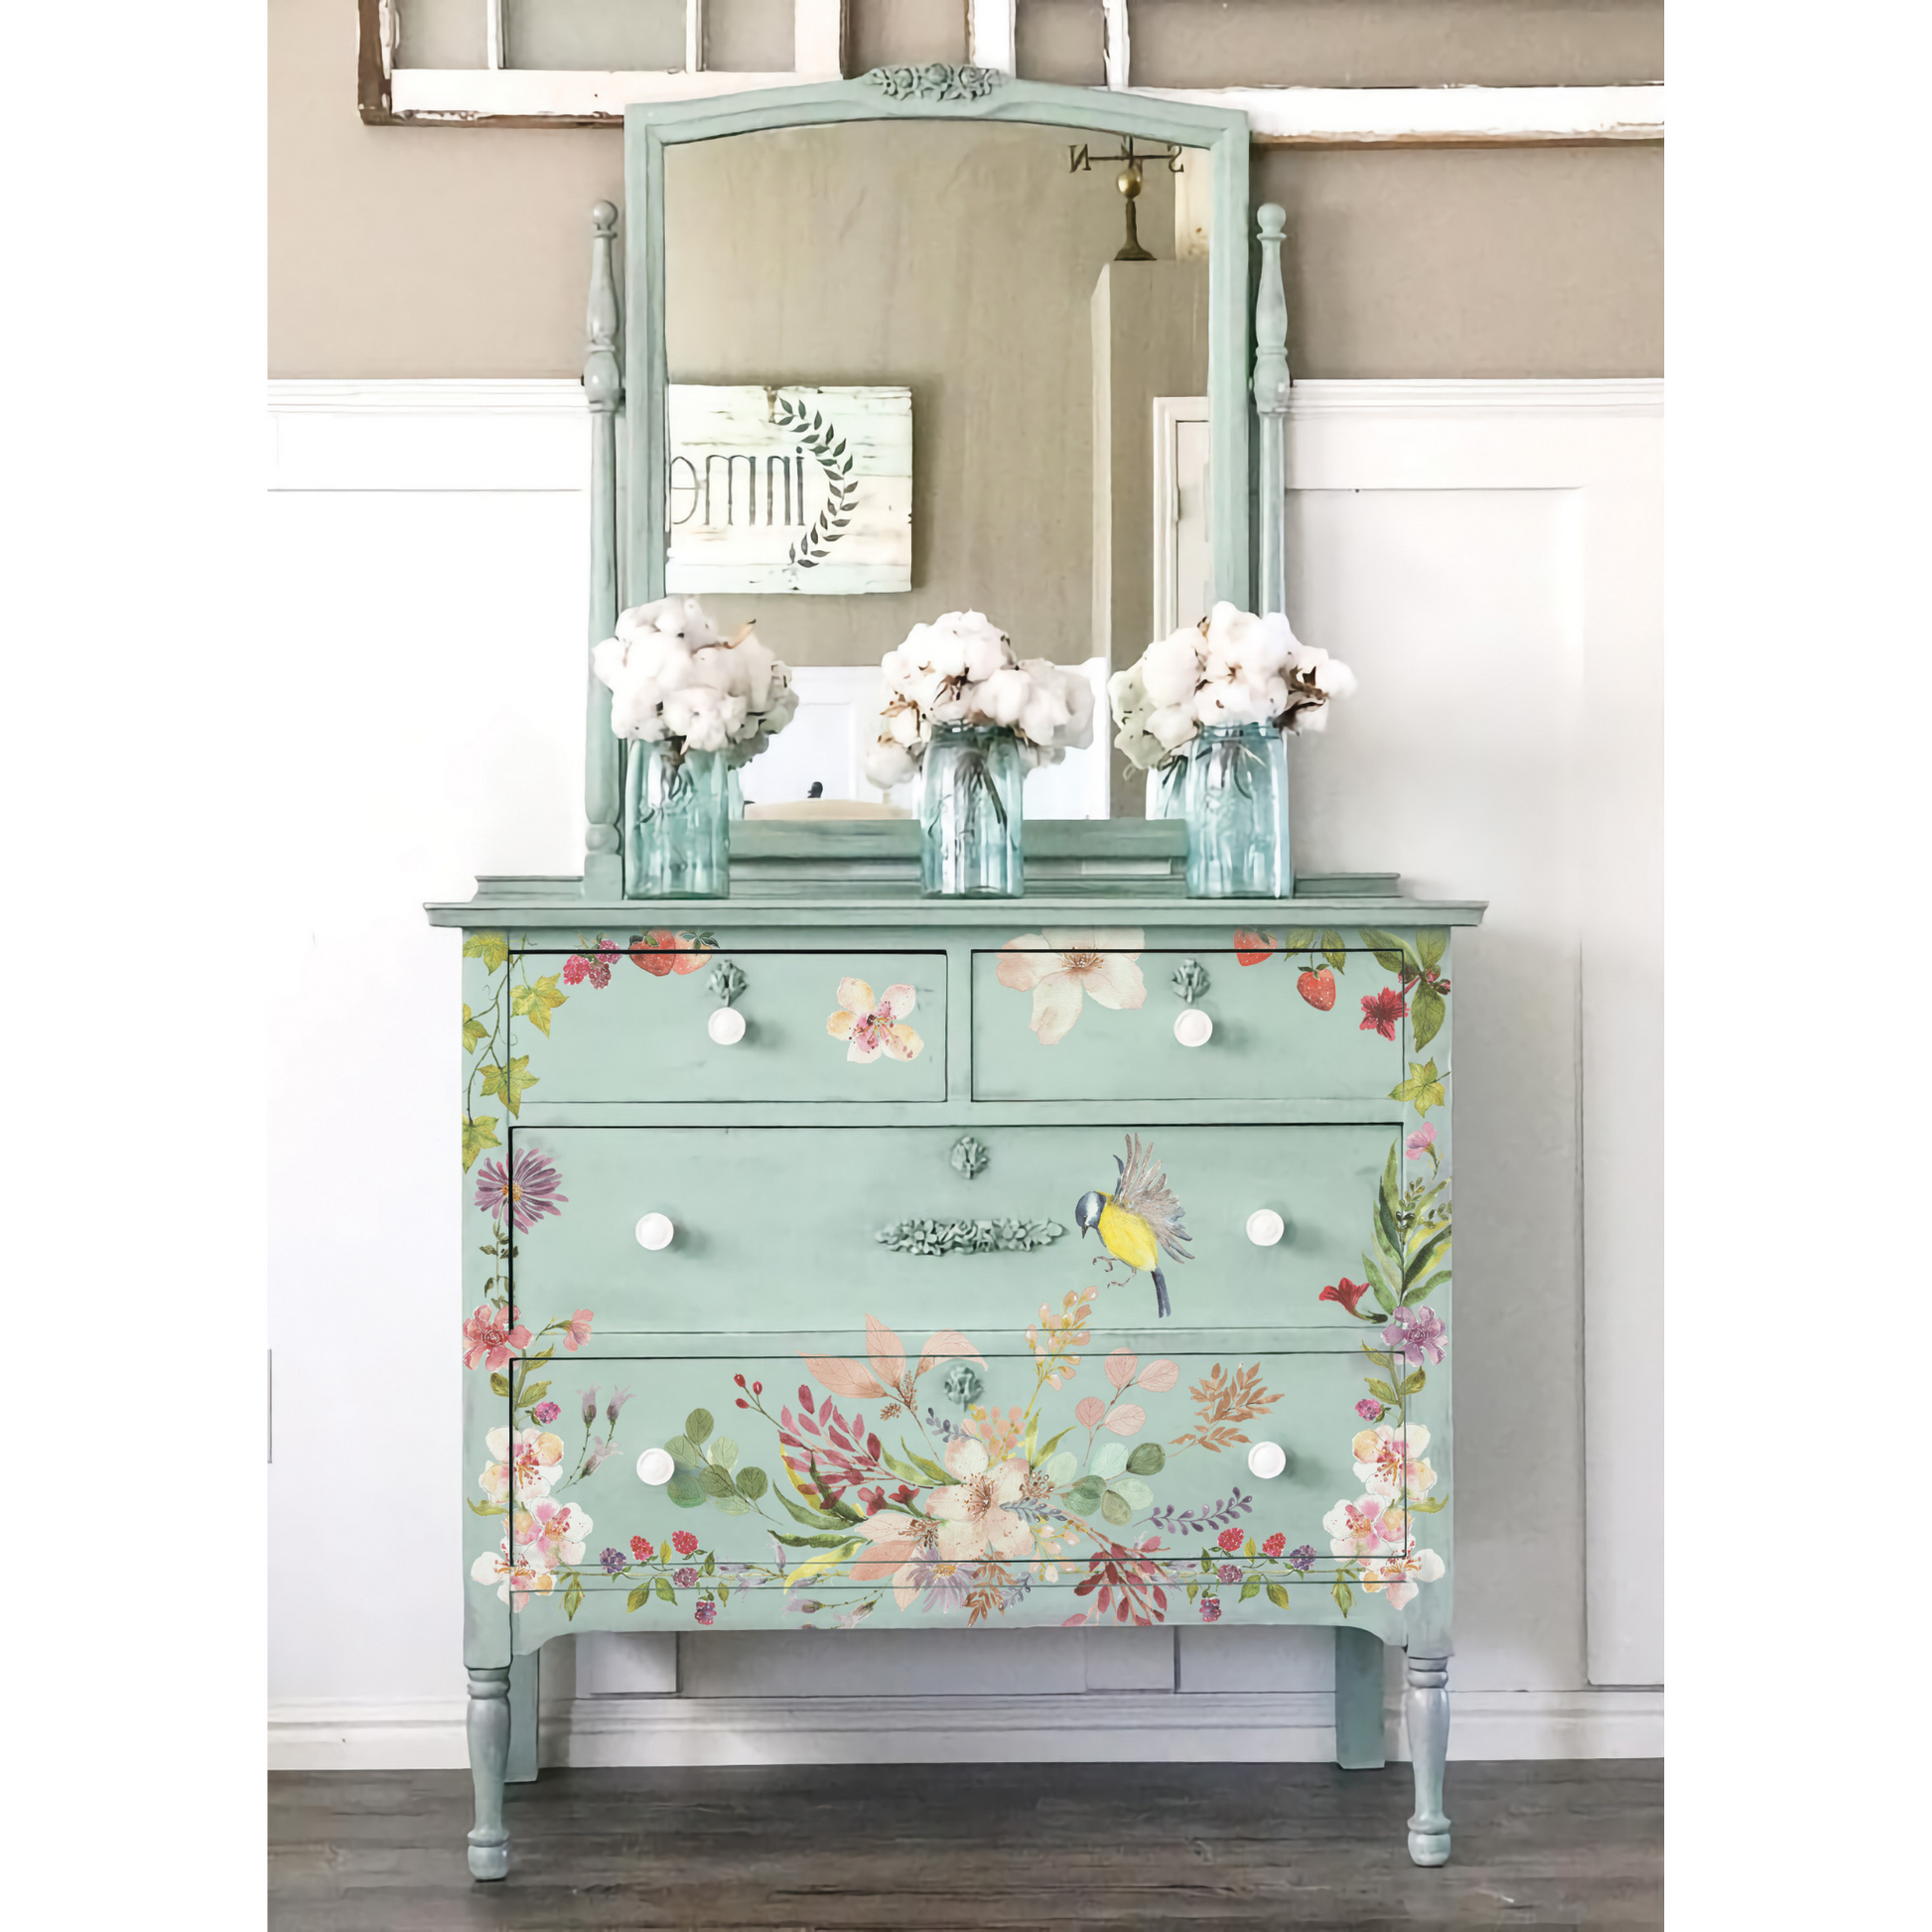 Whispering Willow IOD rub-on furniture transfer by Iron Orchid Designs. Example 1. Includes eight 12" x 16" sheets. Available at Milton's Daughter.